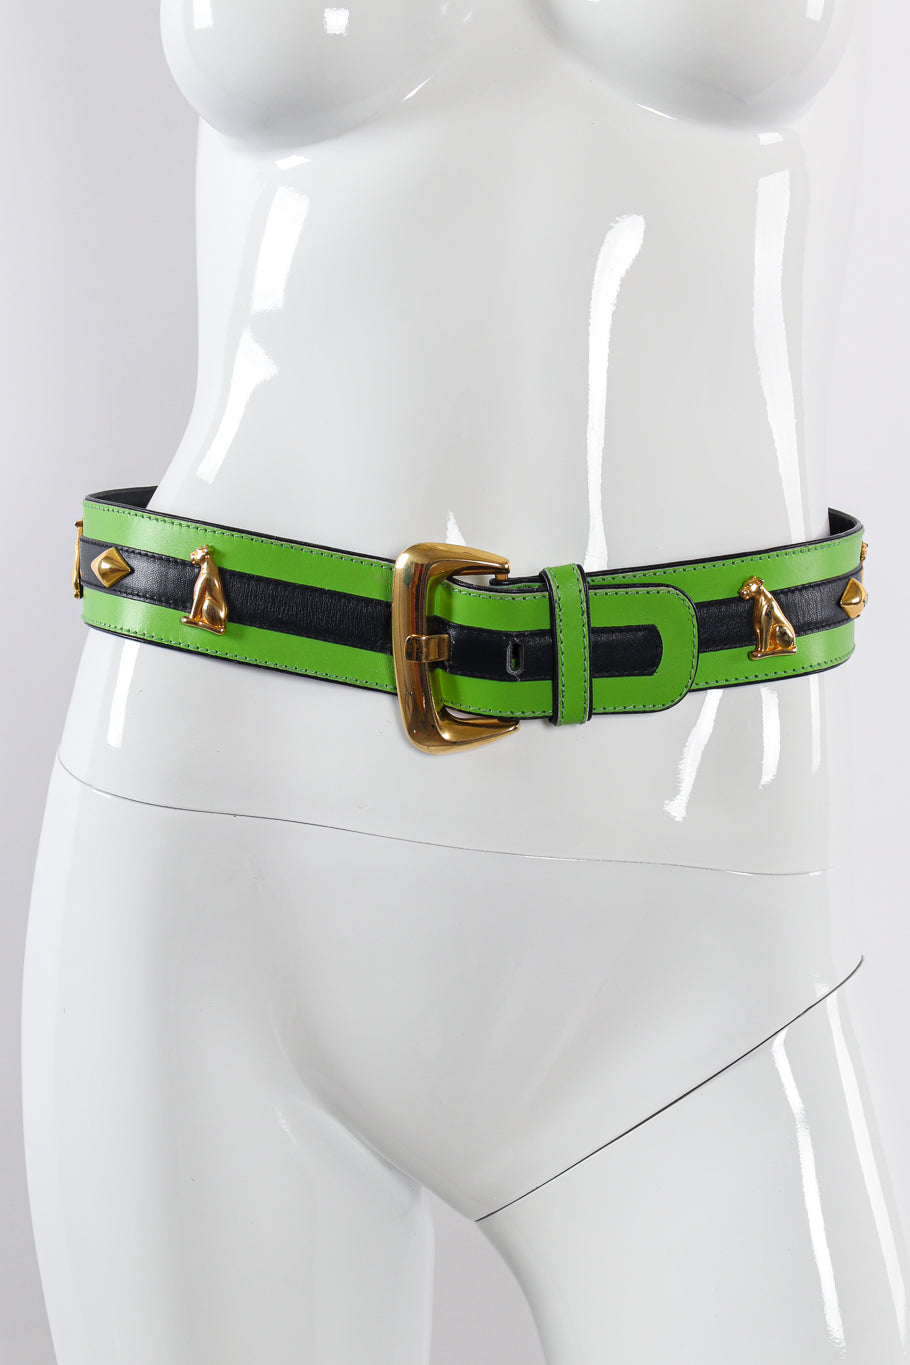 panther studded leather belt by Escada on mannequin front @recessla